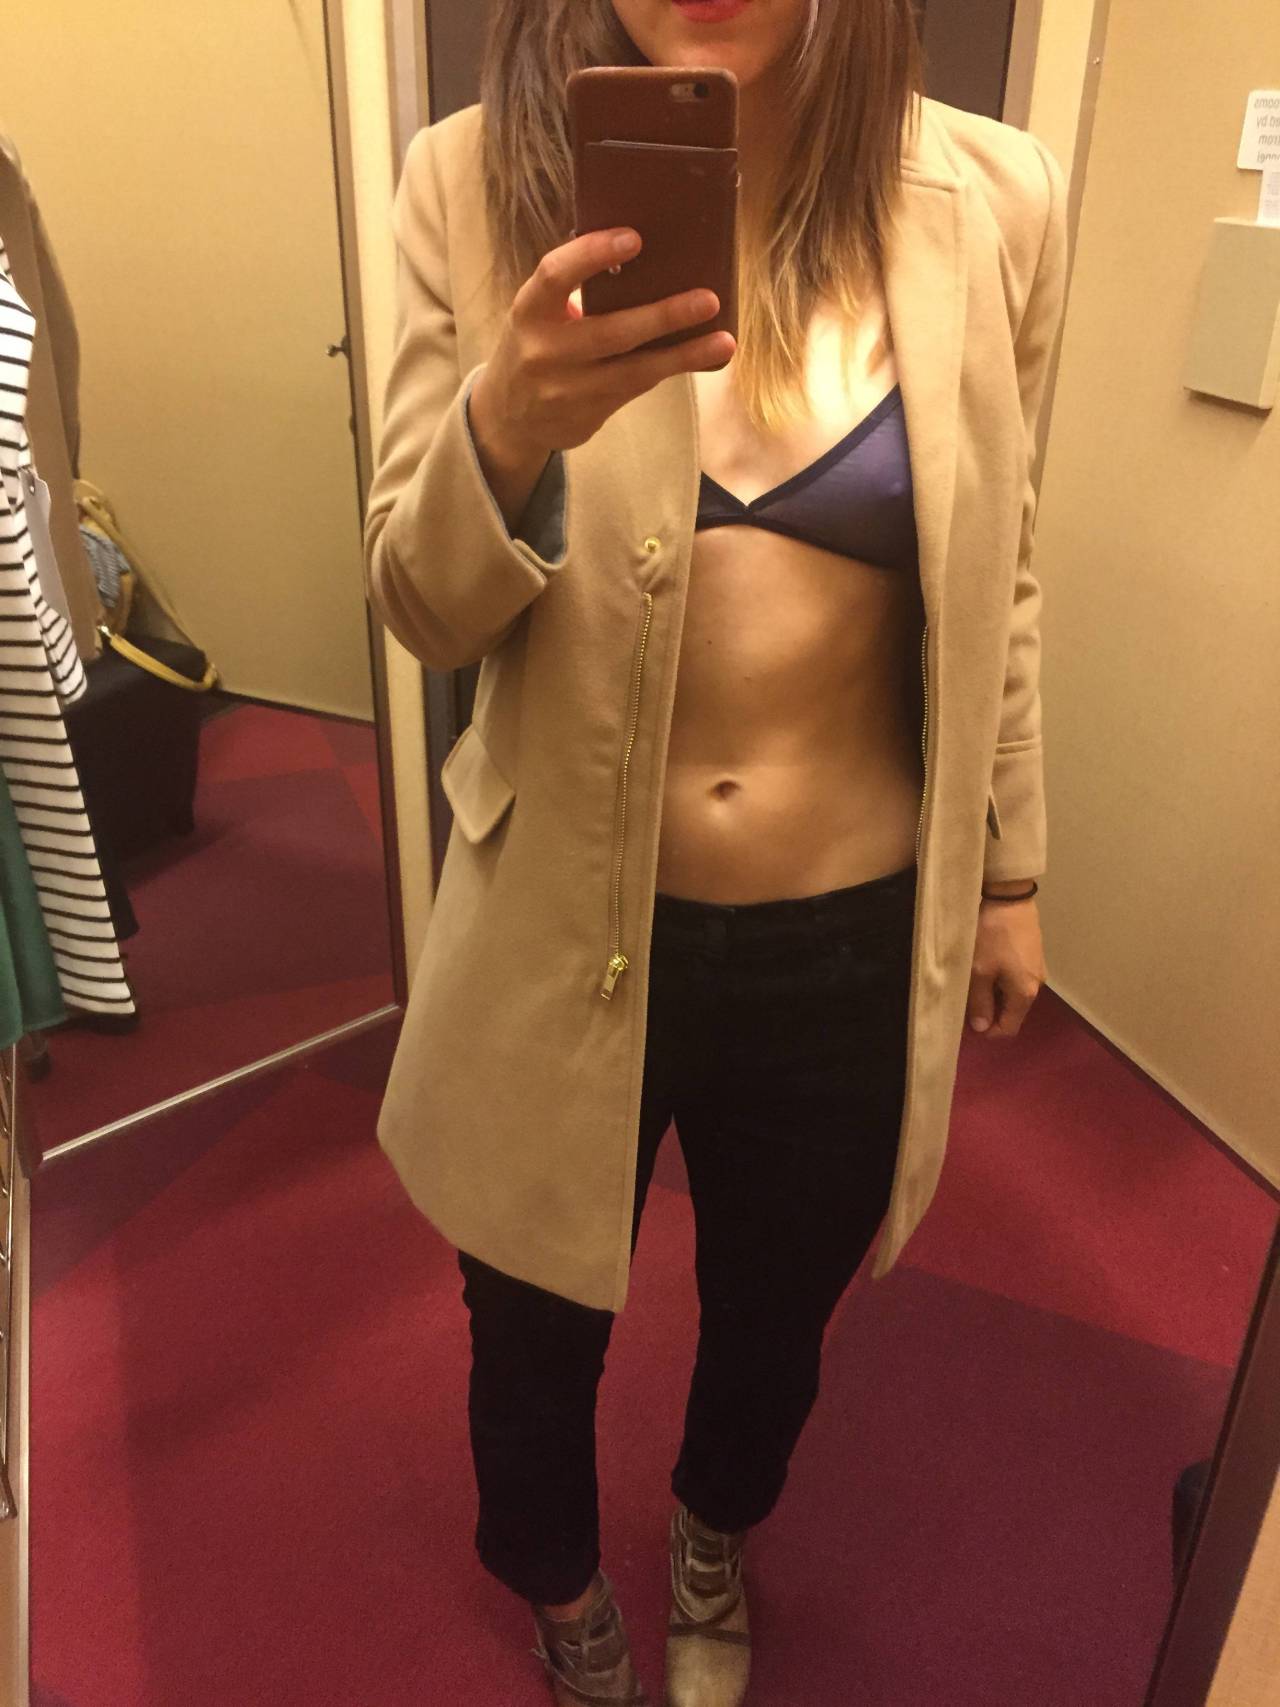 Submit your own changing room pictures now! I think that size fits via /r/ChangingRooms